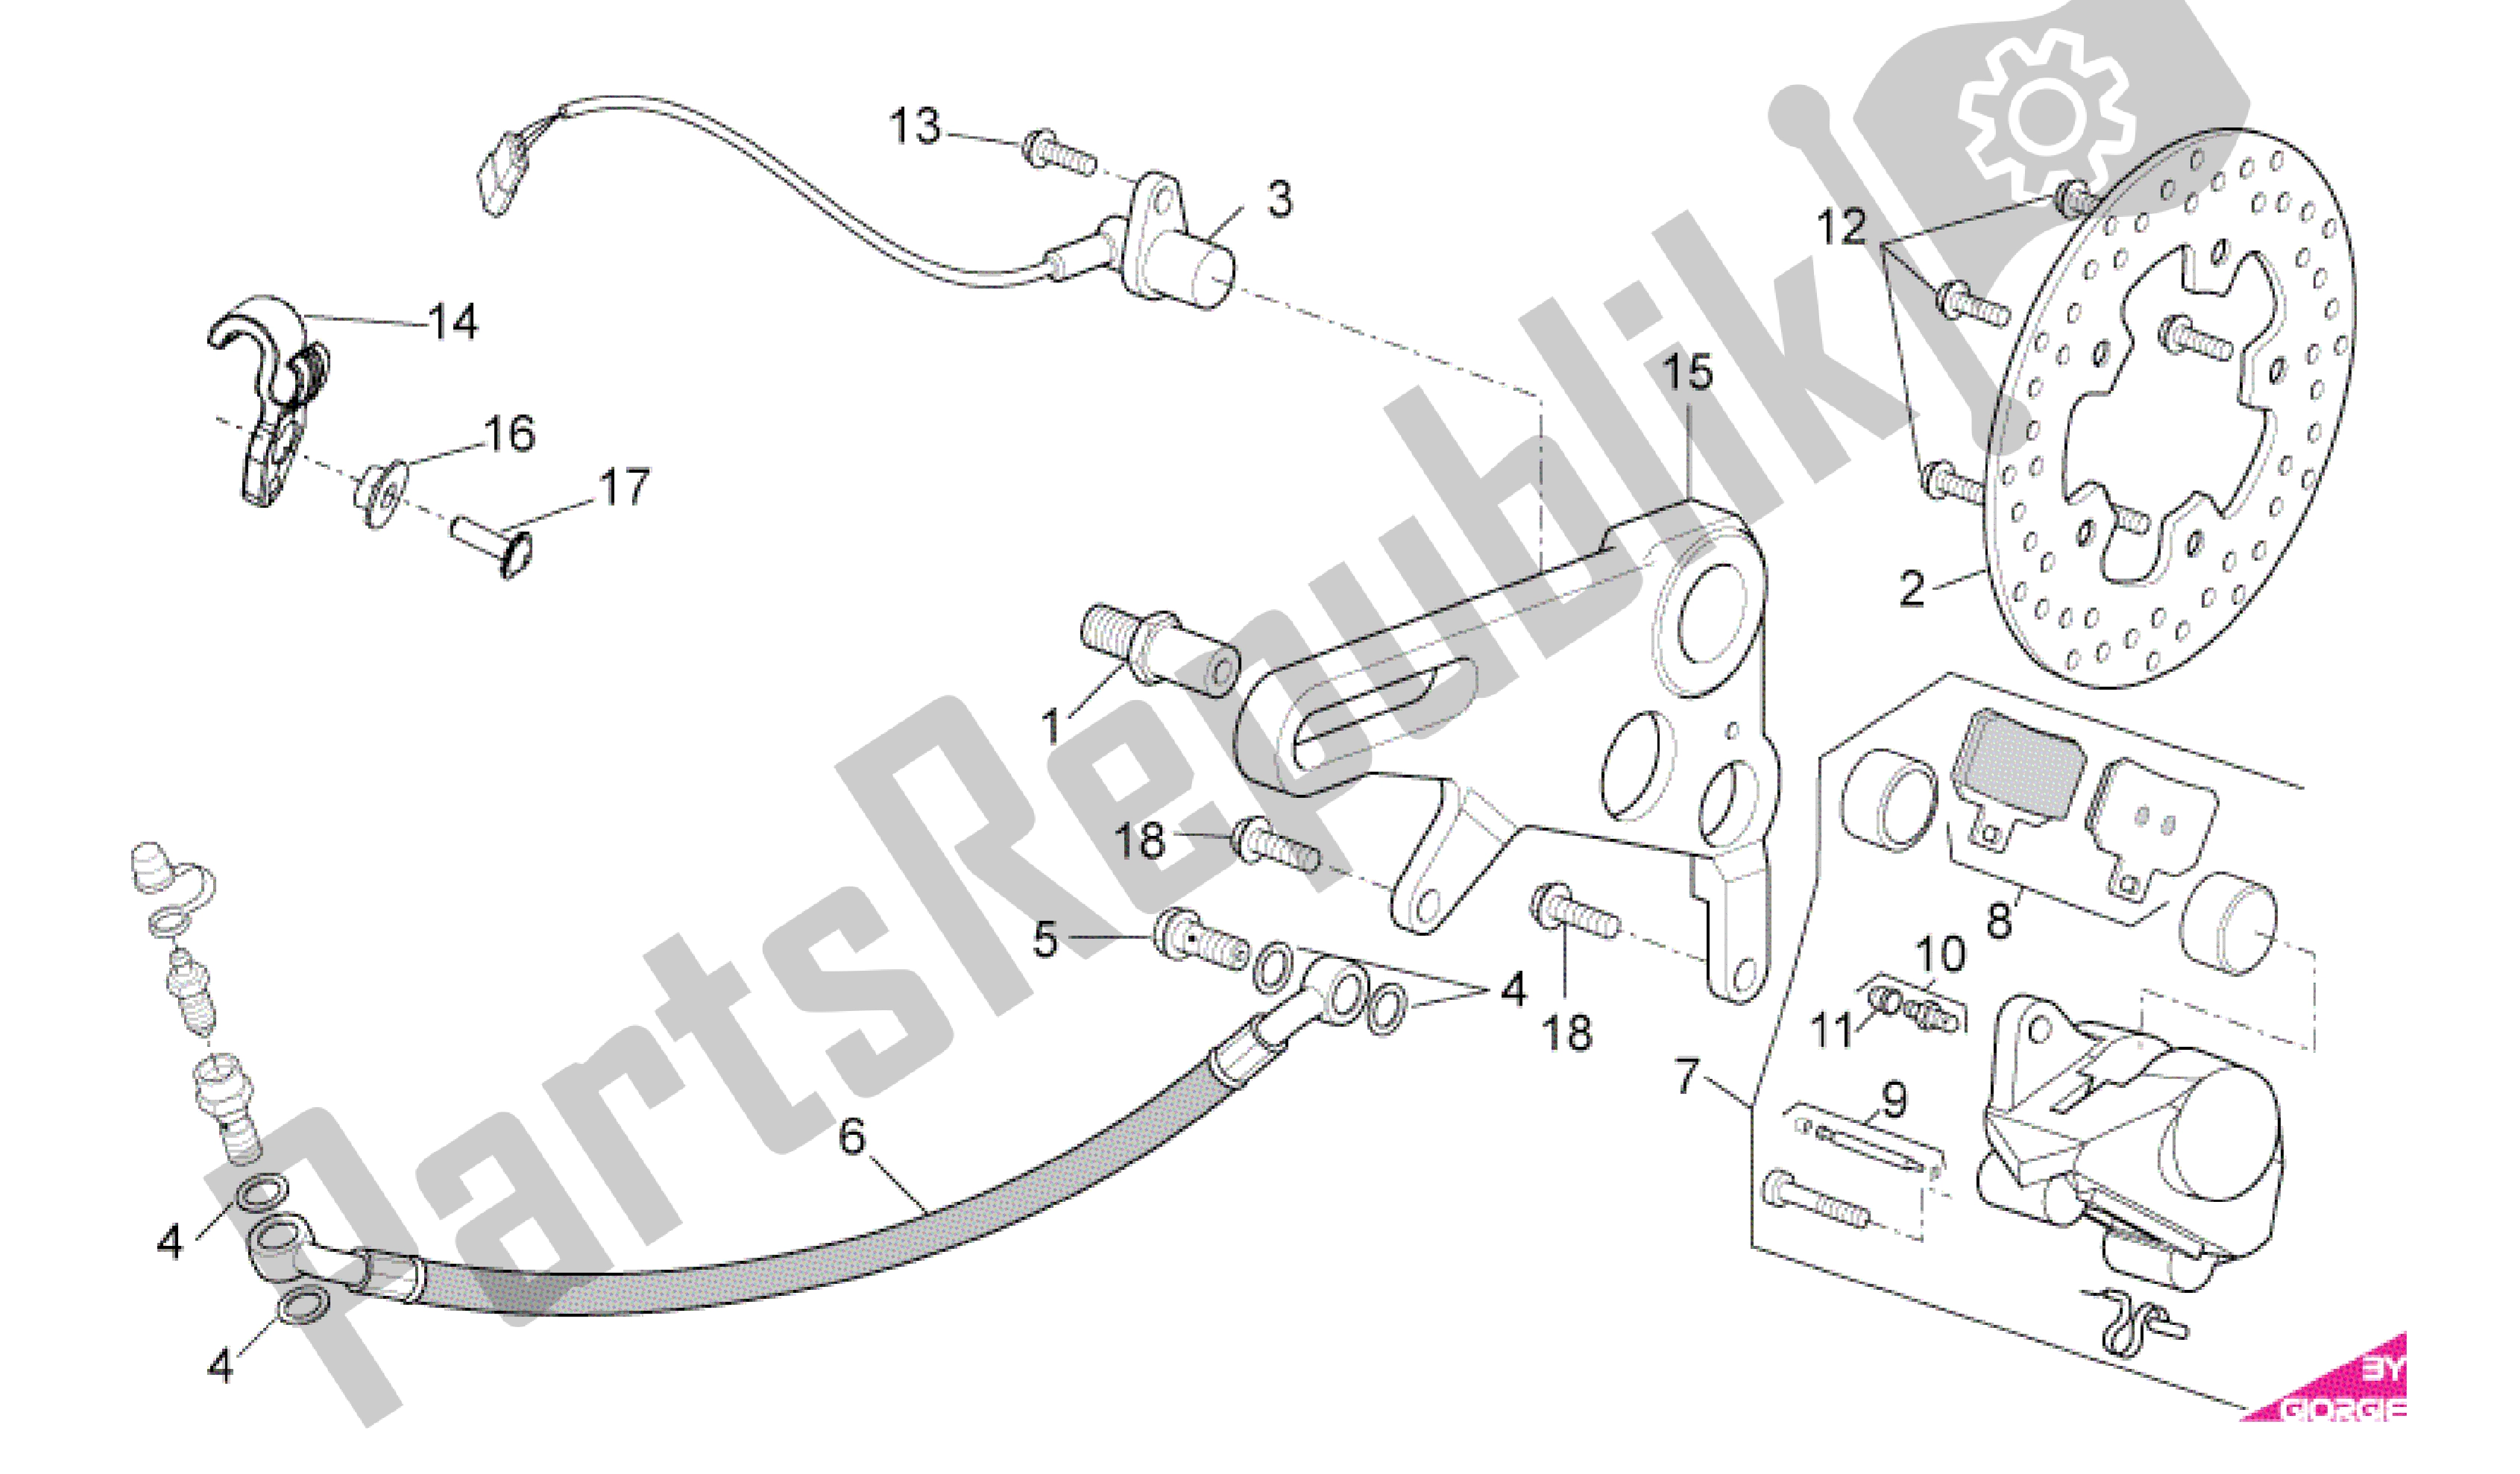 All parts for the Rear Brake Caliper of the Aprilia RSV4 Factory SBK Racing 3979 1000 2009 - 2010